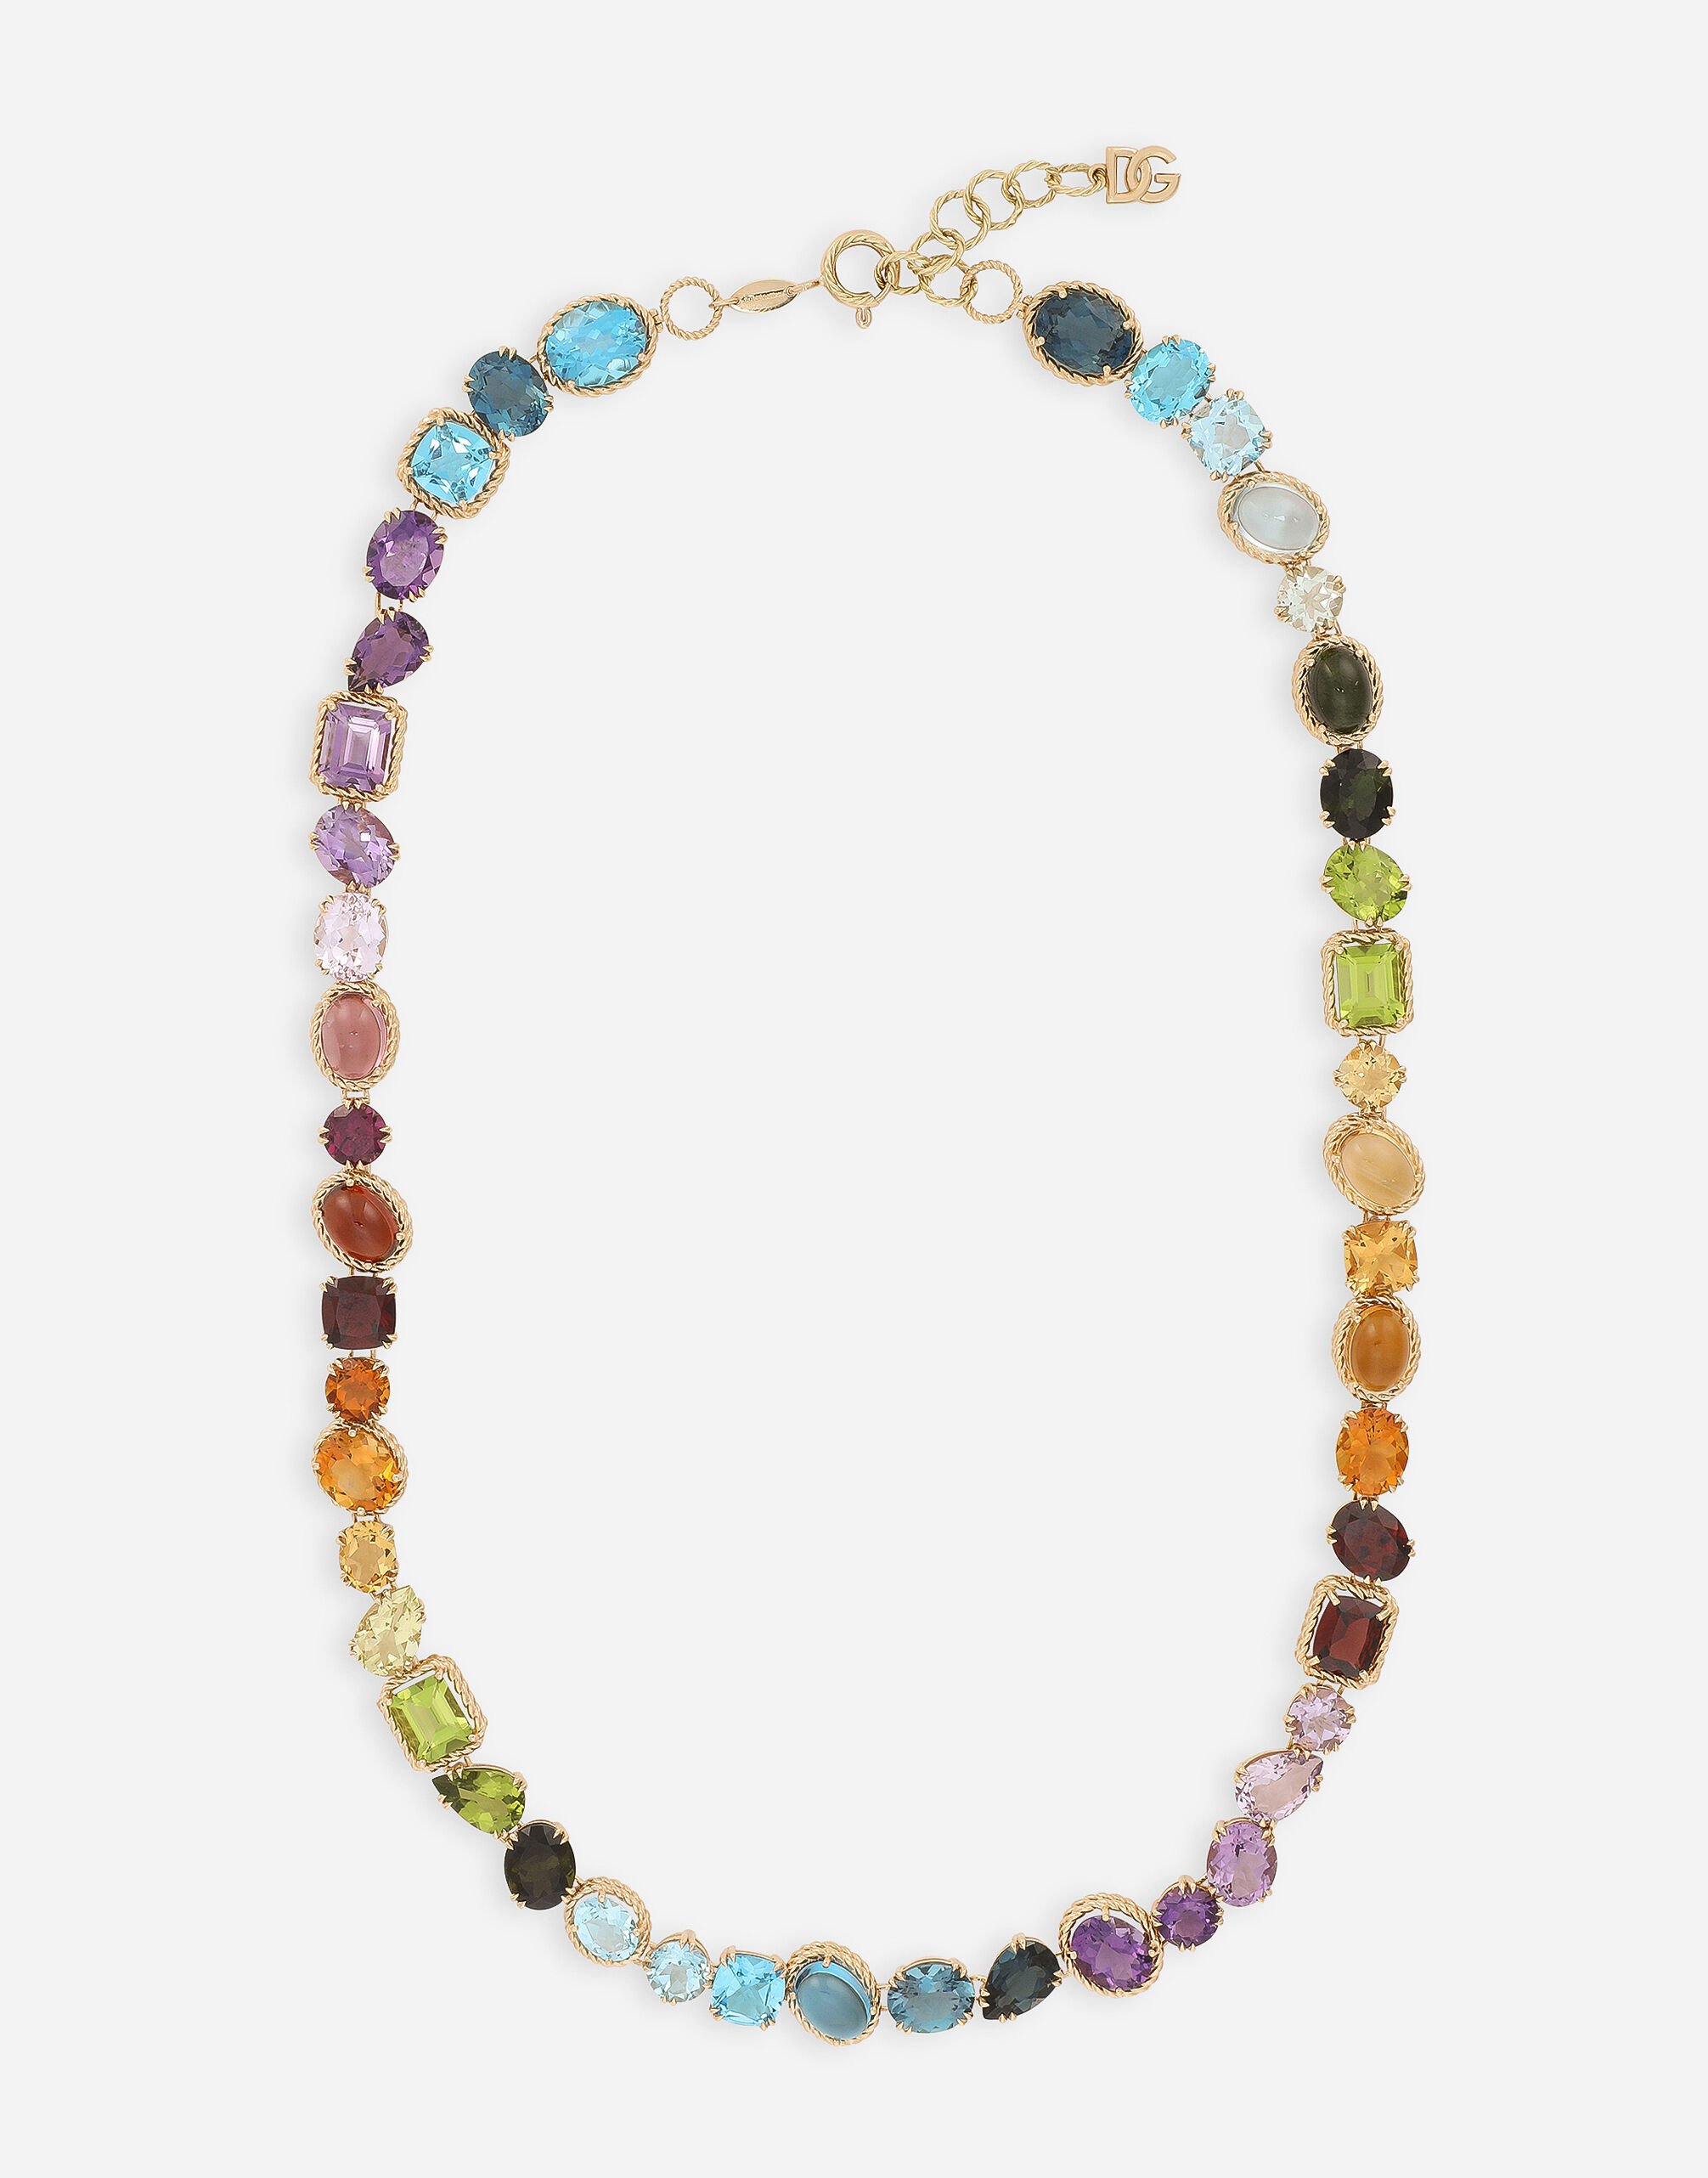 Dolce & Gabbana Rainbow necklaces in yellow gold 18kt with multicolor gemstones Gold WNQA3GWQC01